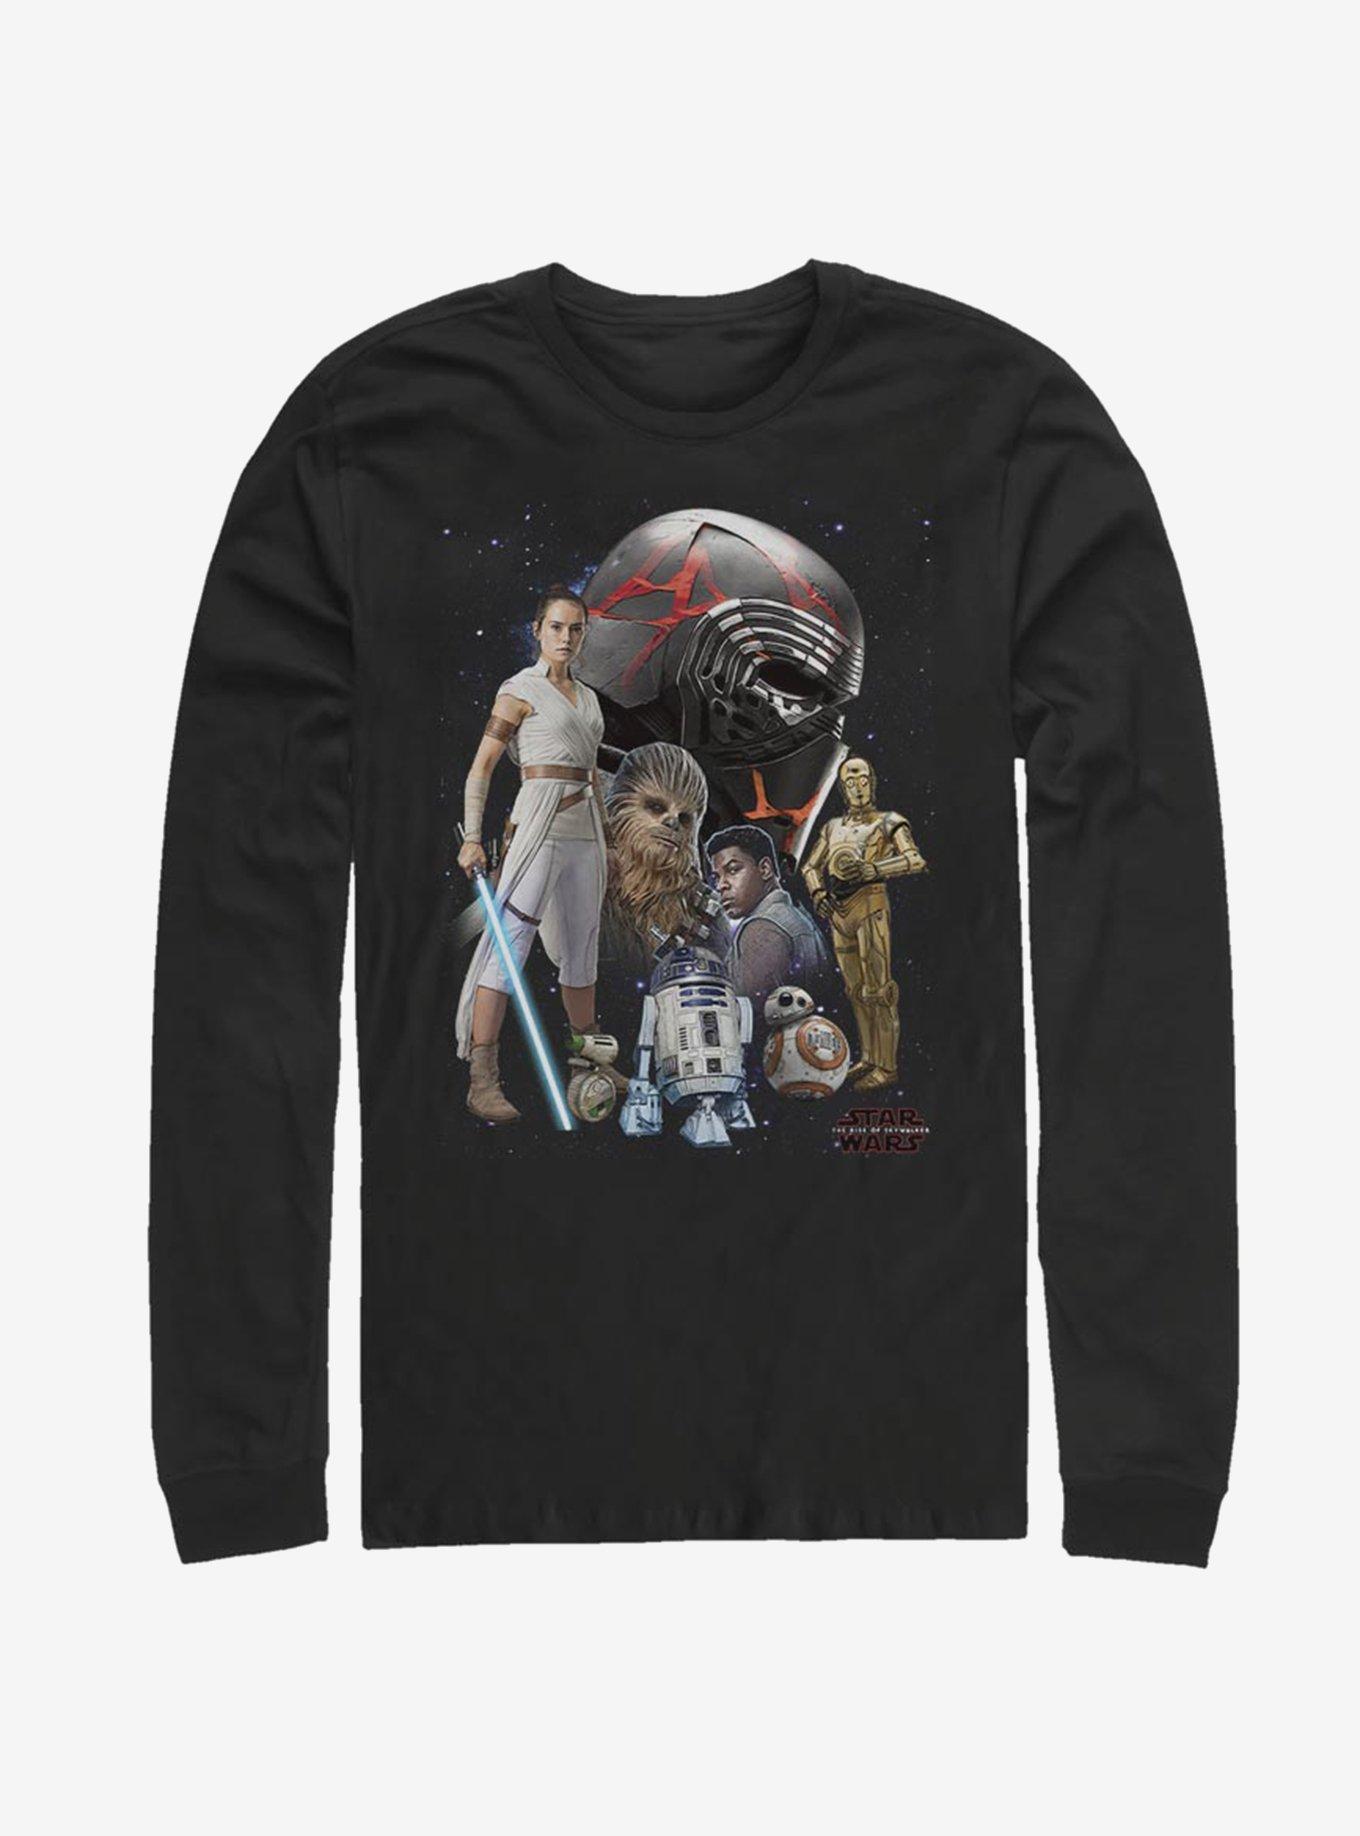 Star Wars Episode IX The Rise Of Skywalker Heroes Of The Galaxy Long-Sleeve T-Shirt, BLACK, hi-res